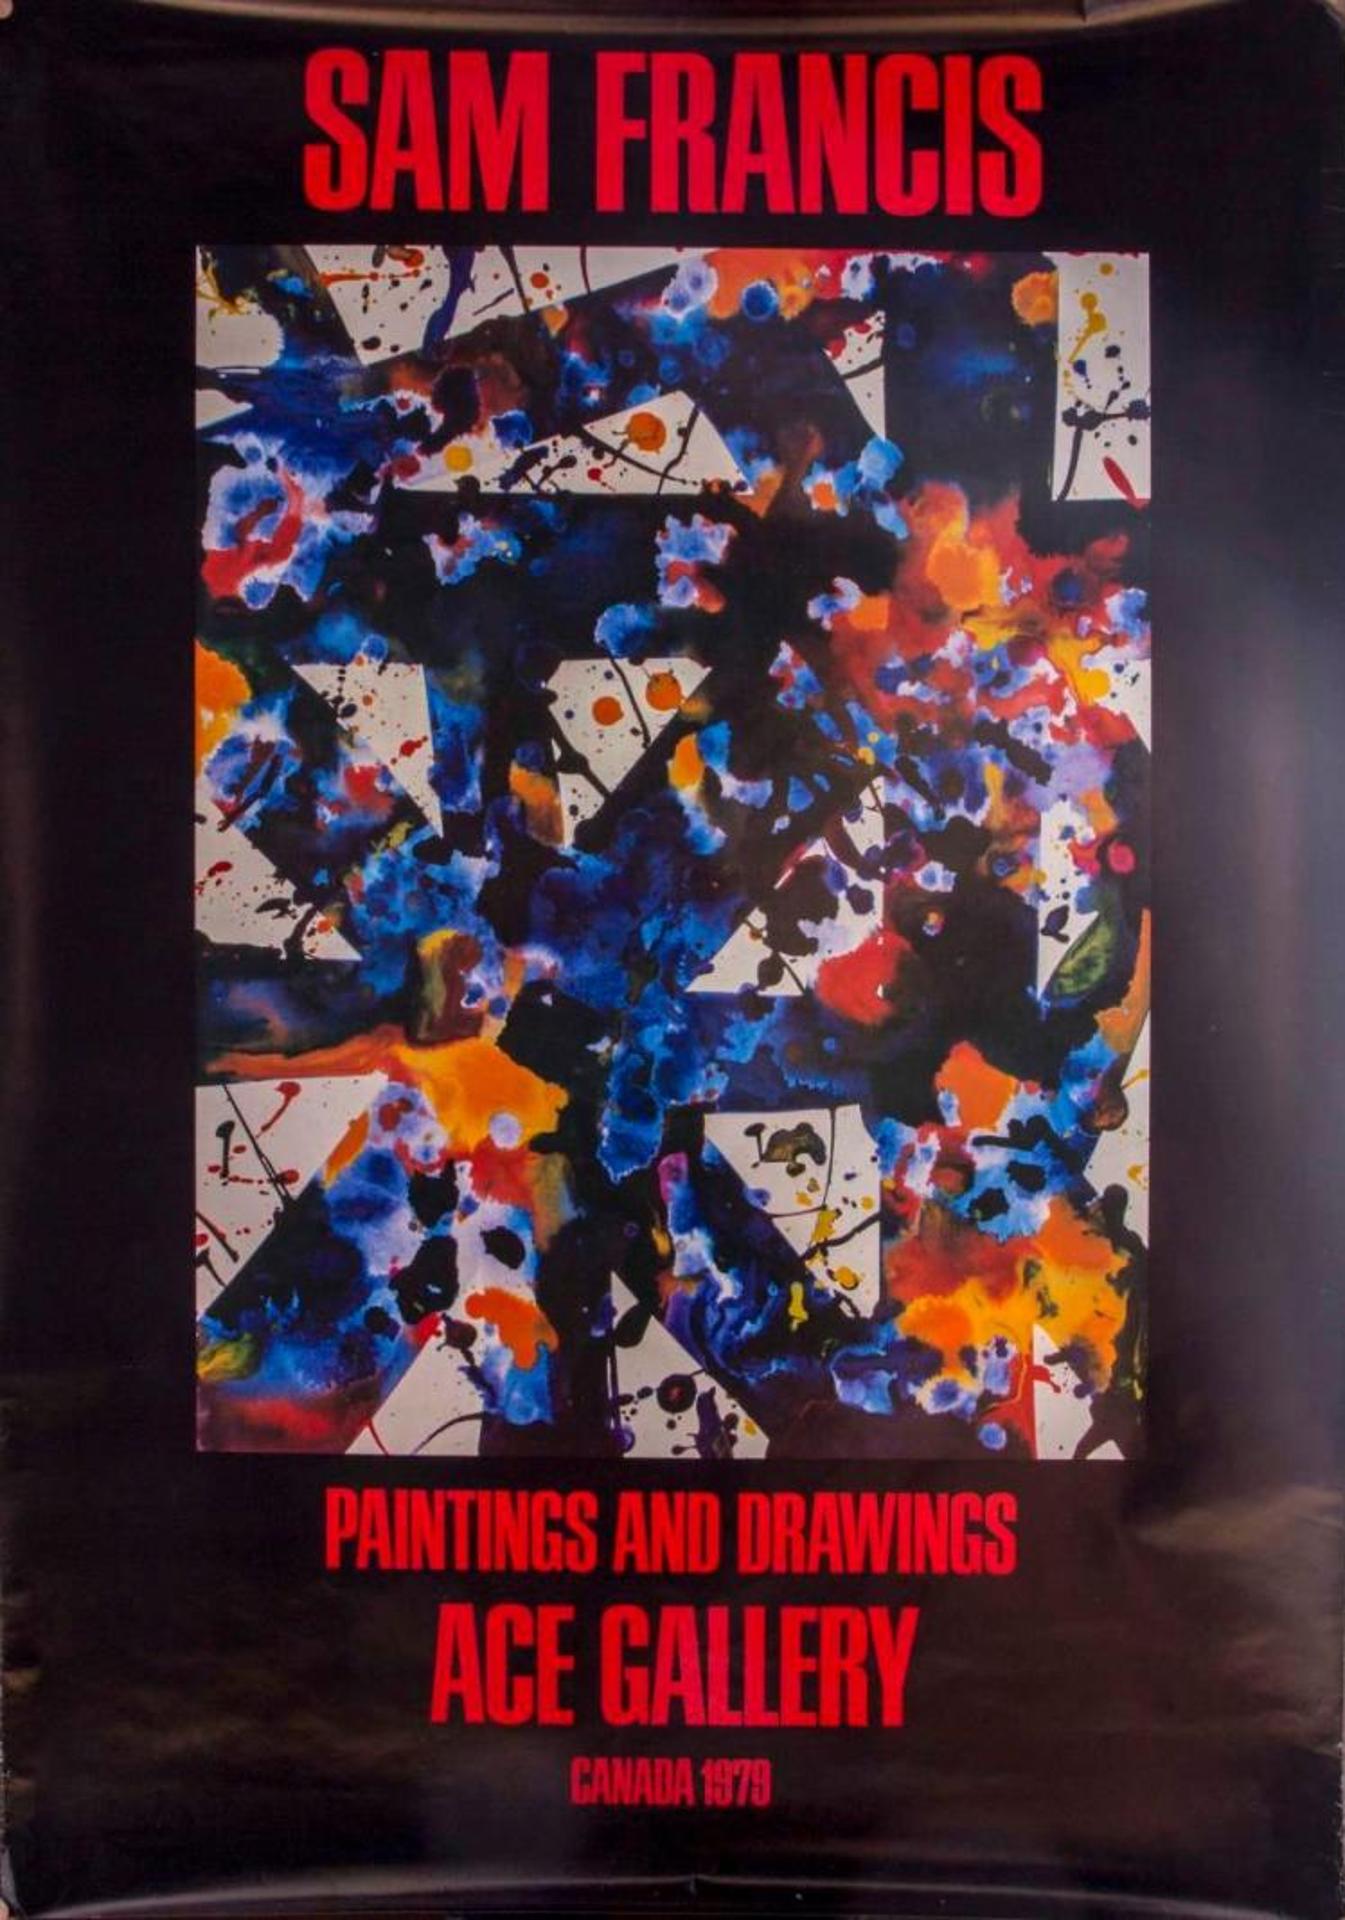 Sam Francis (1923-1994) - Paintings and Drawings -ACE Gallery - Canada 1979